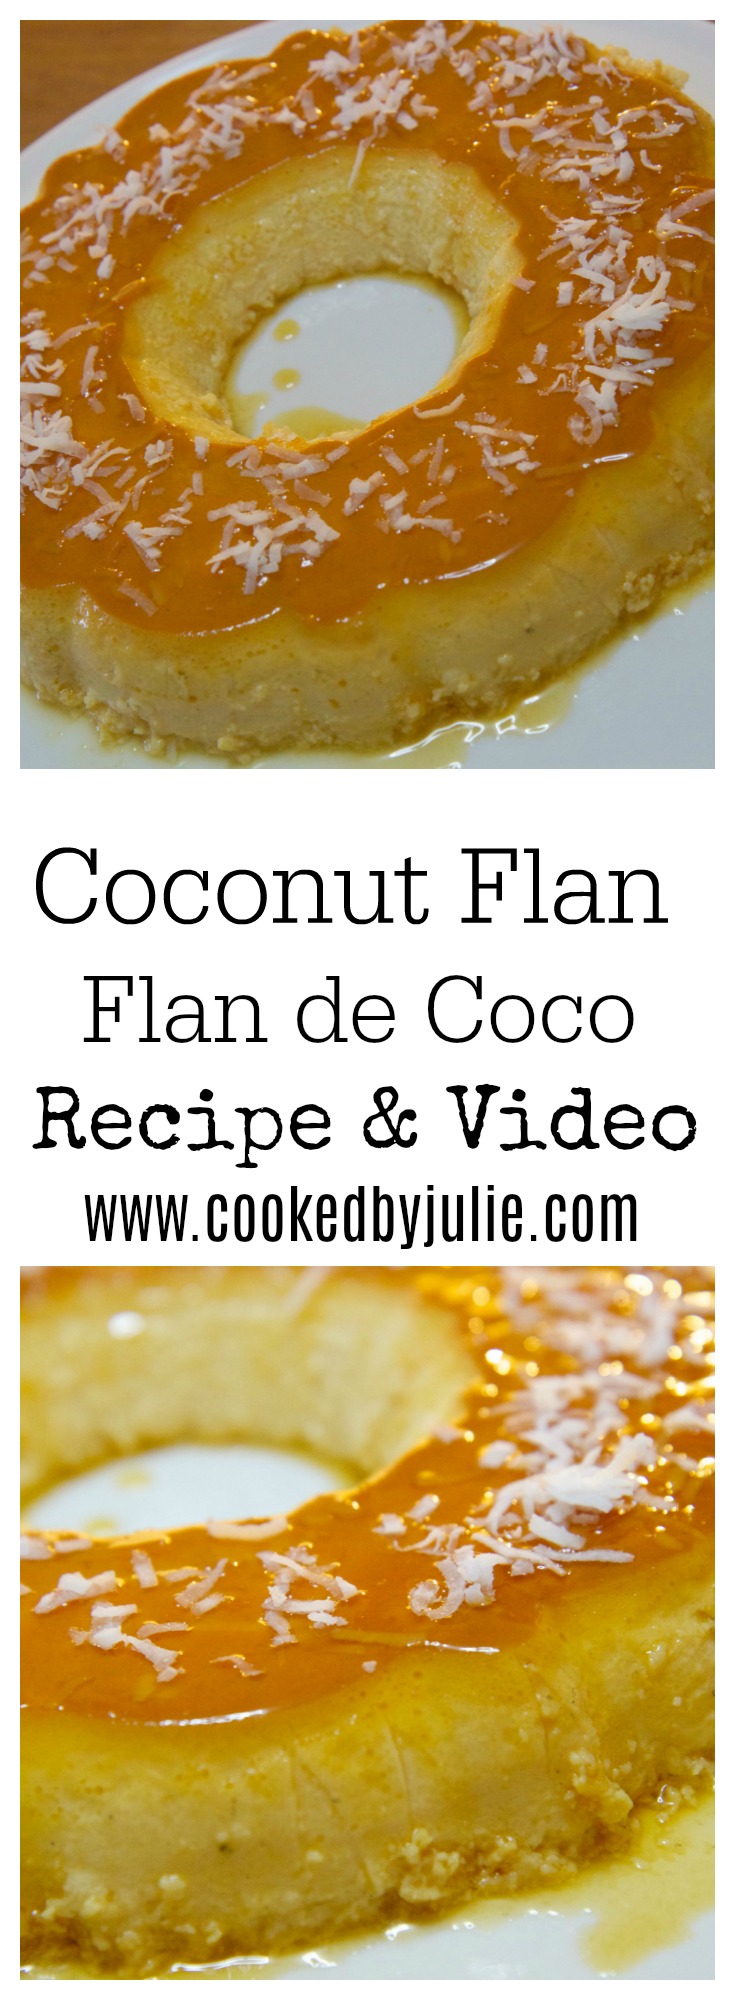 Coconut Flan | Flan de Coco Recipe & Step-by-Step Video from Cooked by Julie